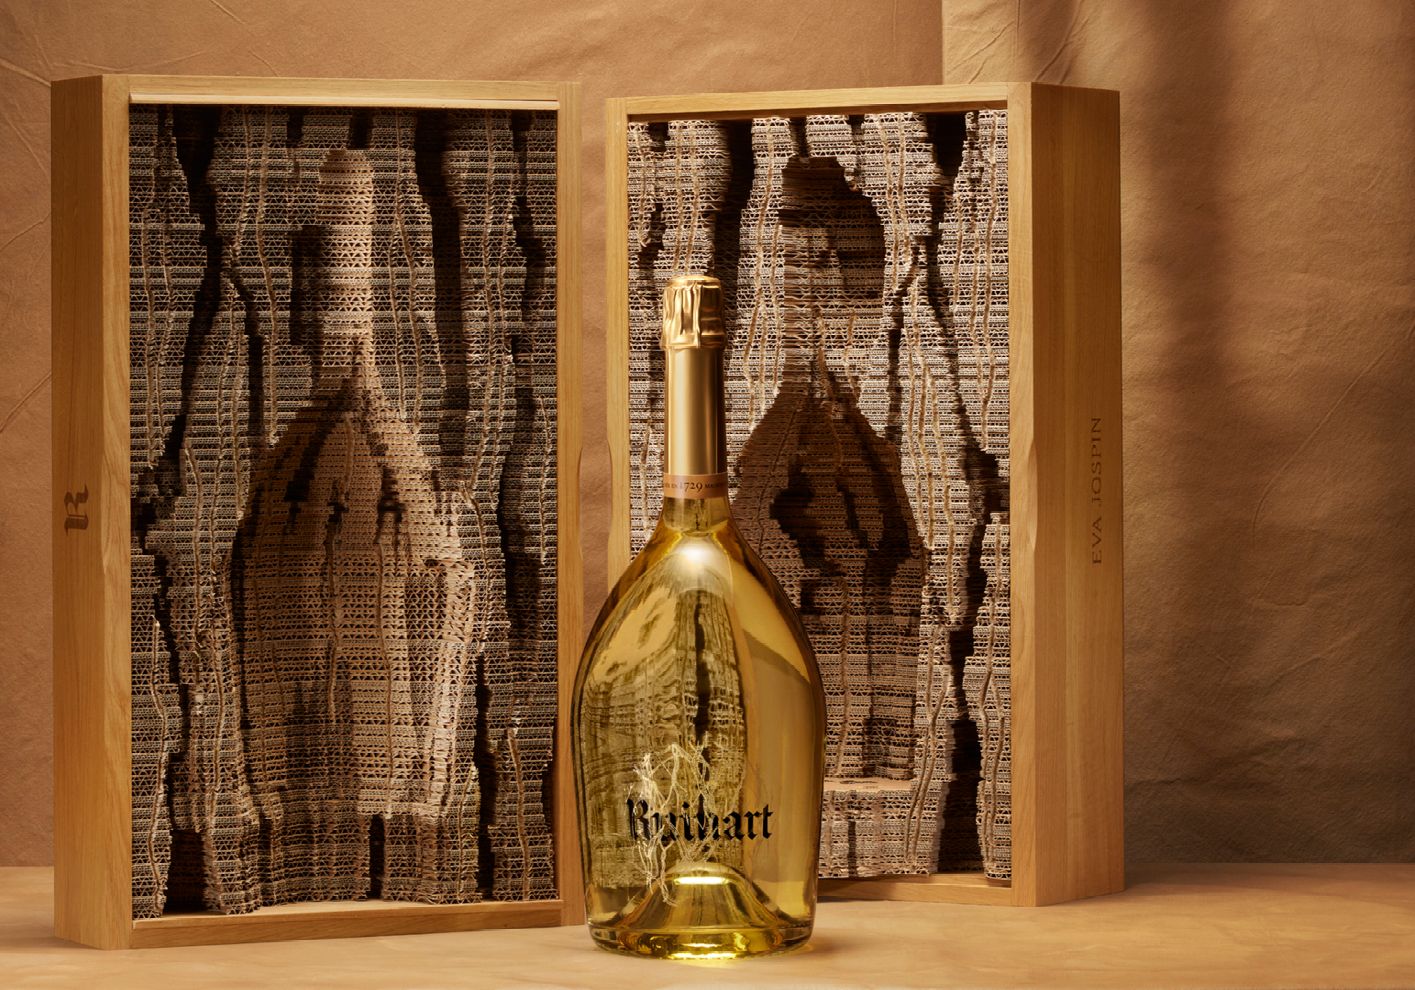 Jospin has created a case for the limited-edition Jeroboam of Ruinart’s Blanc de Blancs